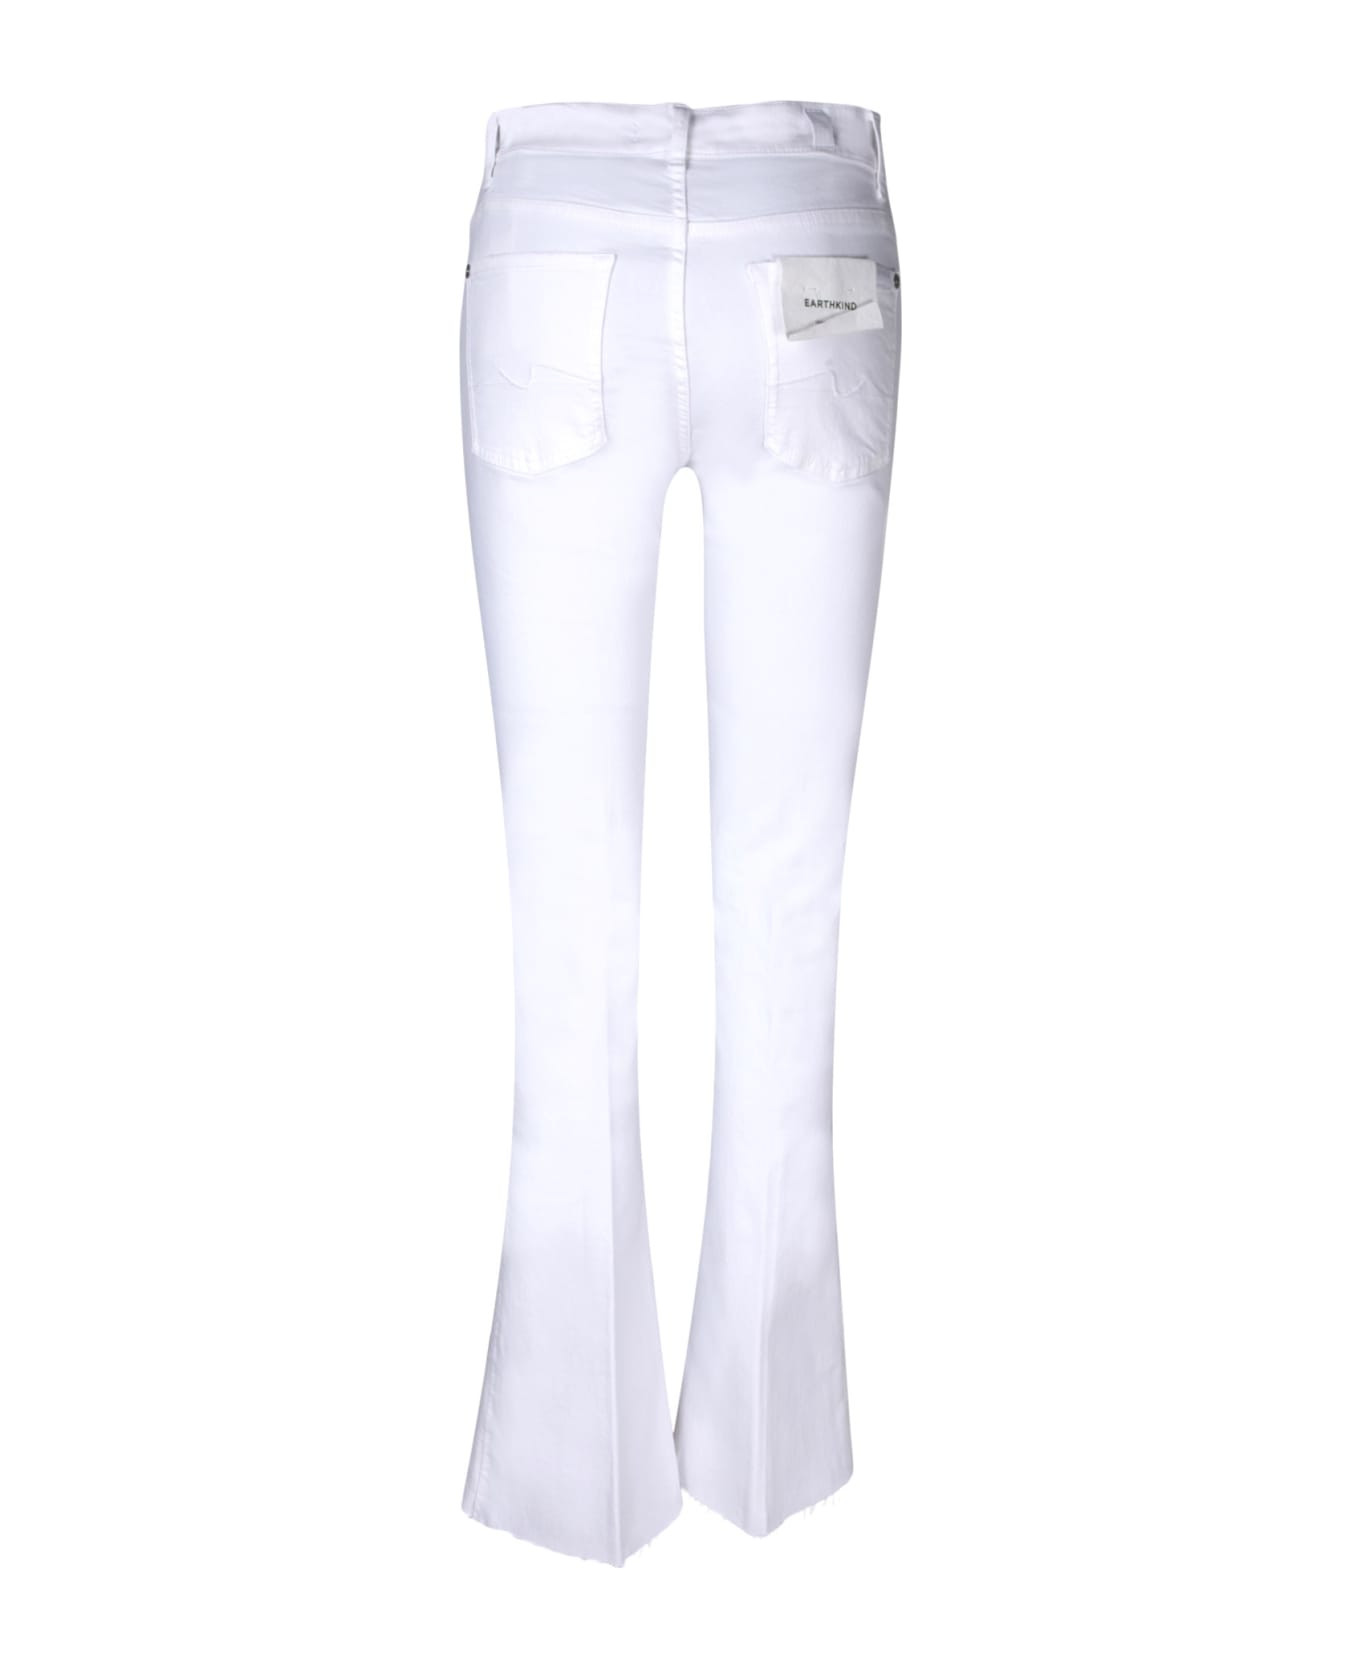 7 For All Mankind Bootcut White Jeans - White